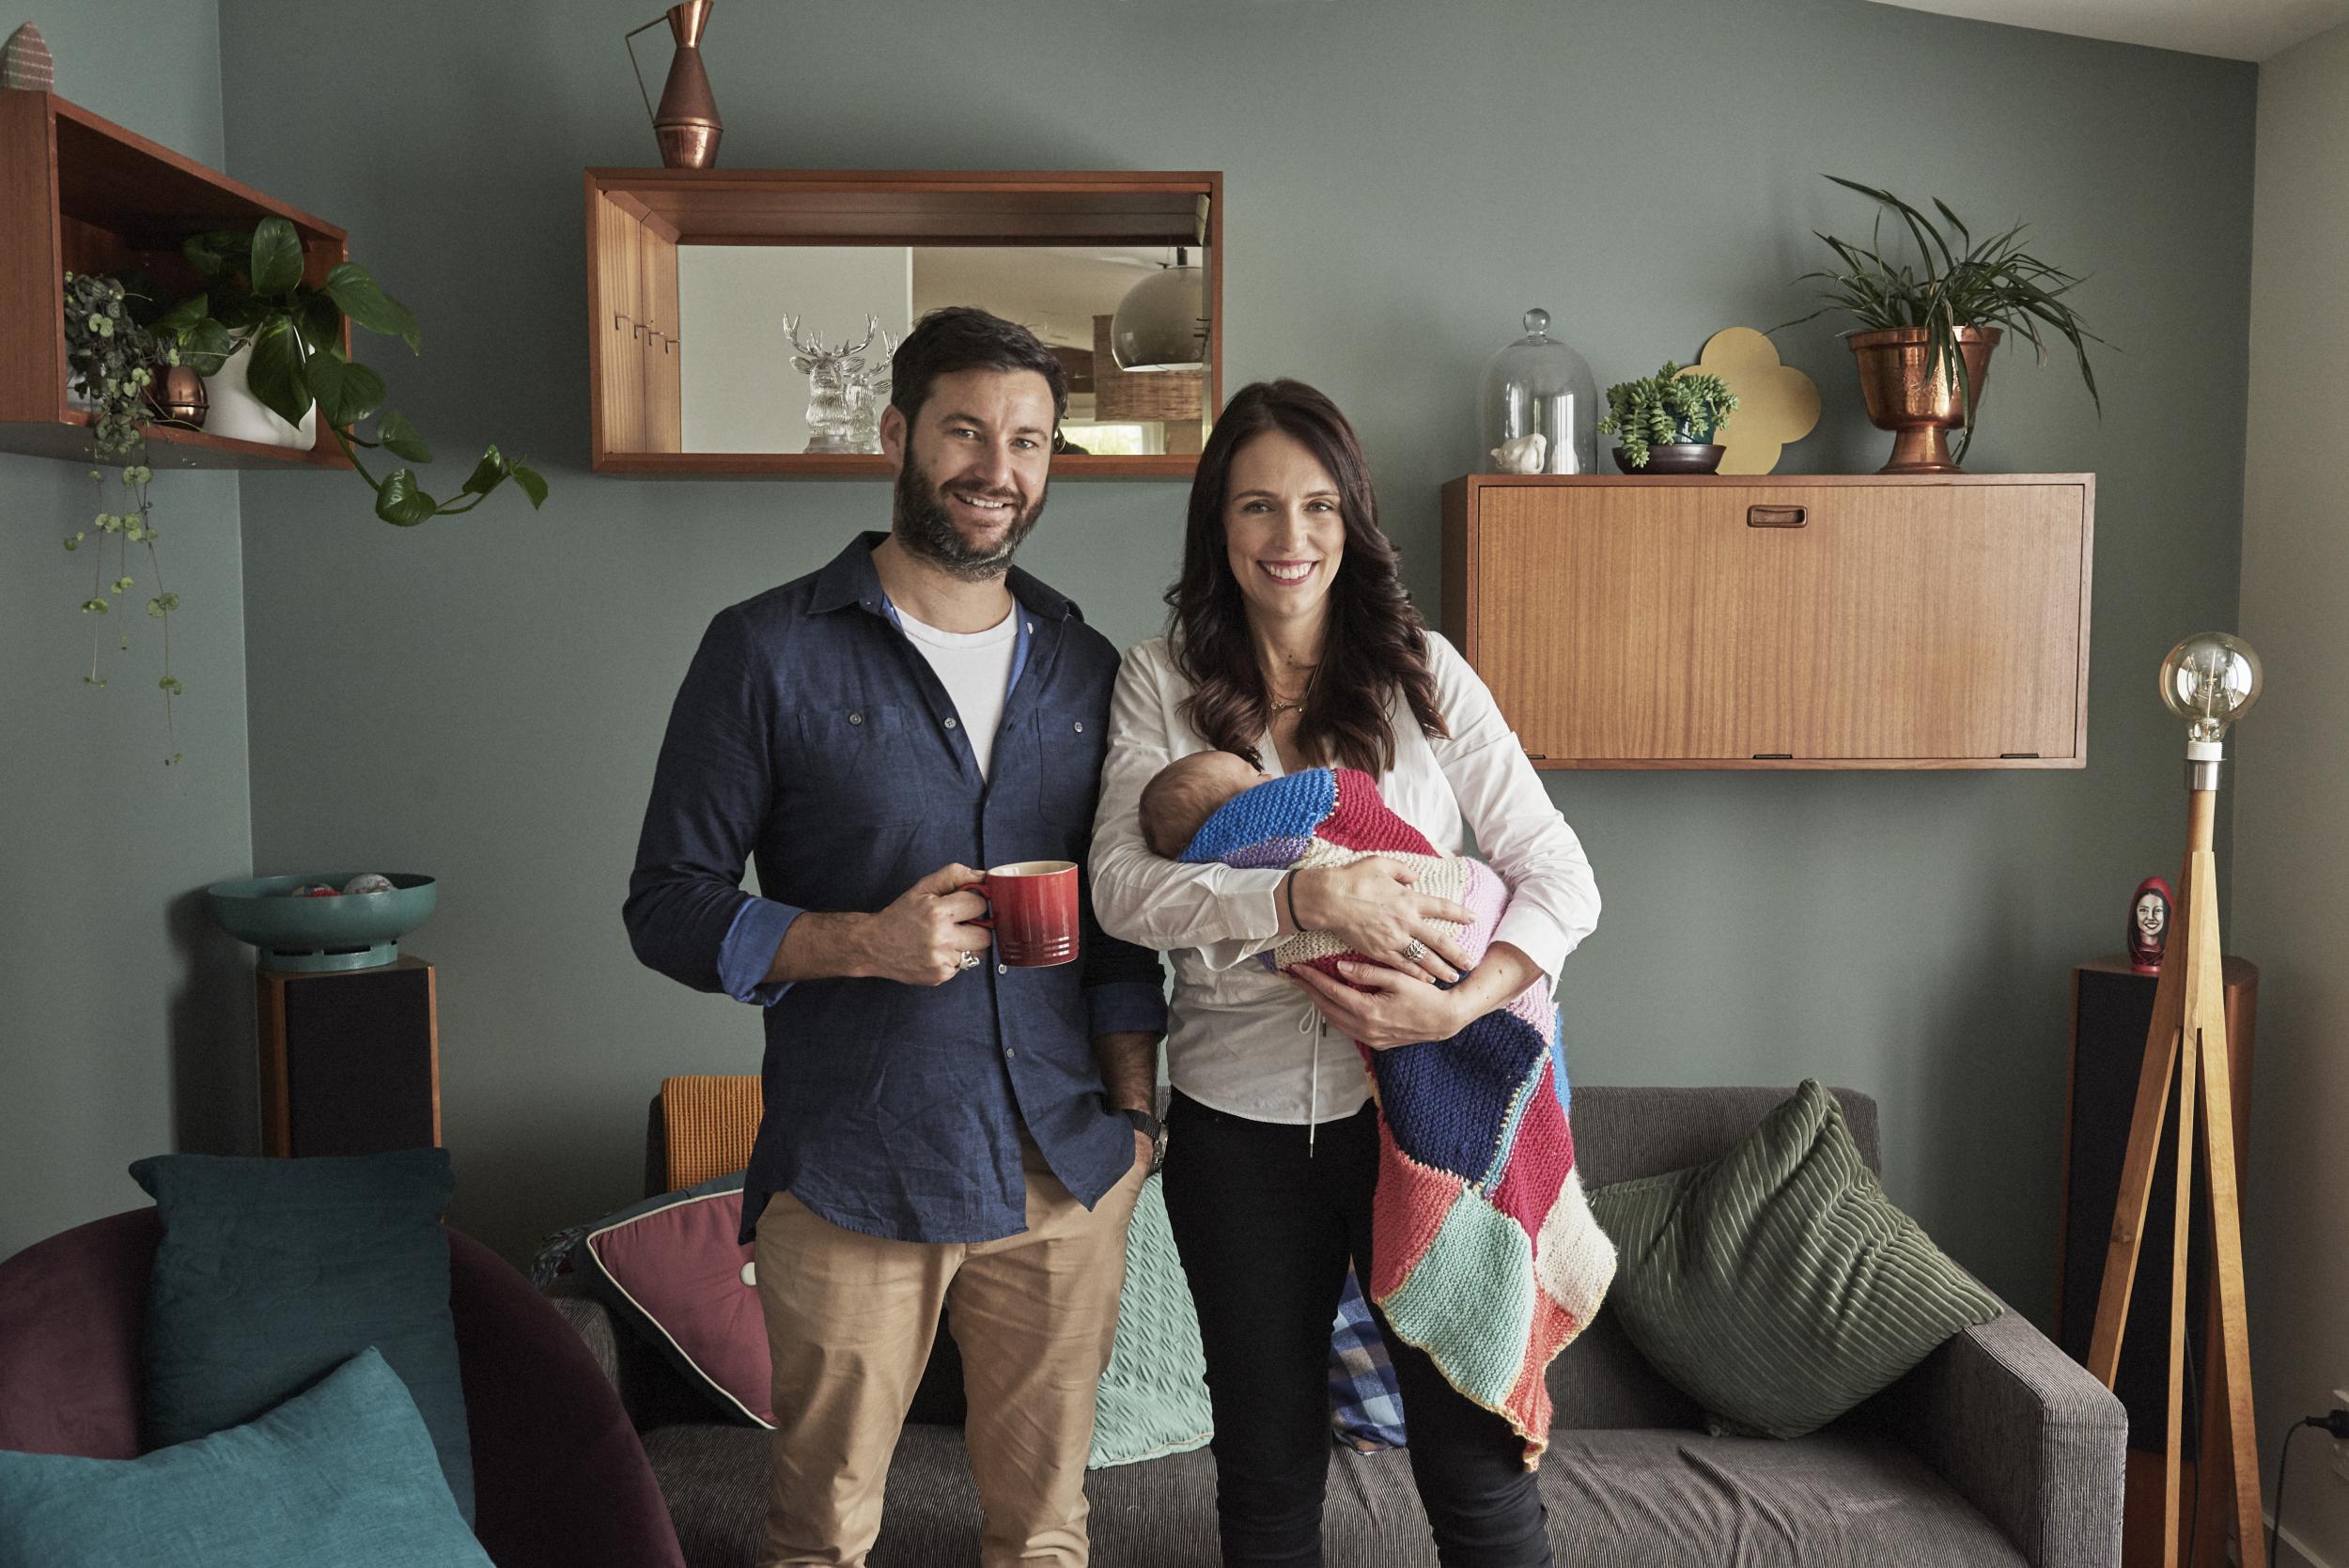 Prime Minister Jacinda Ardern and partner Clarke Gayford pose with their baby daughter Neve Gayford at their home on 2 August 2018